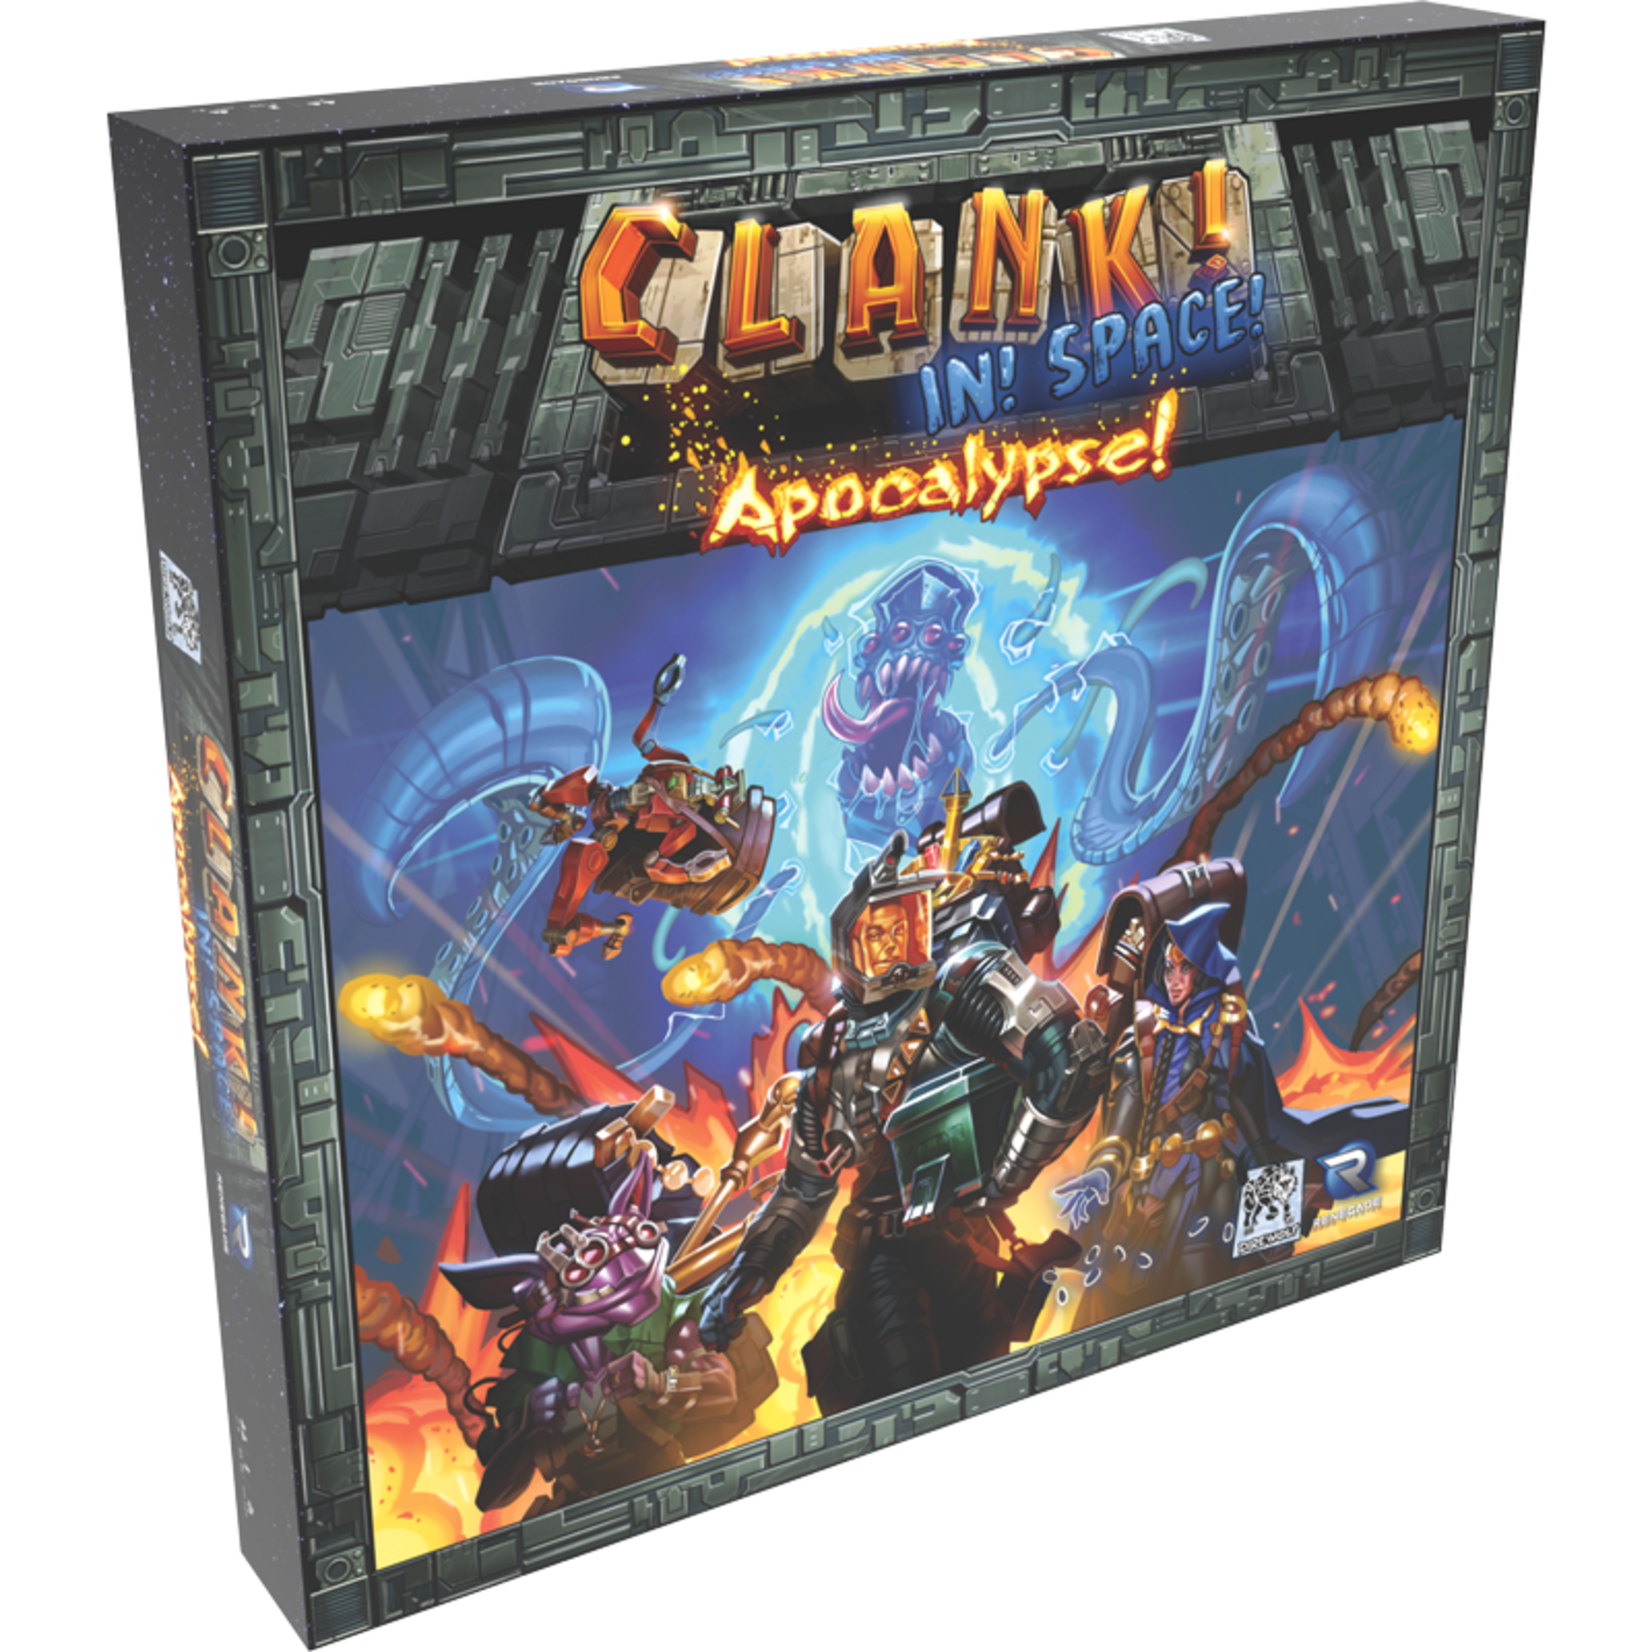 Clank! in Space! - Apocalypse Expansion